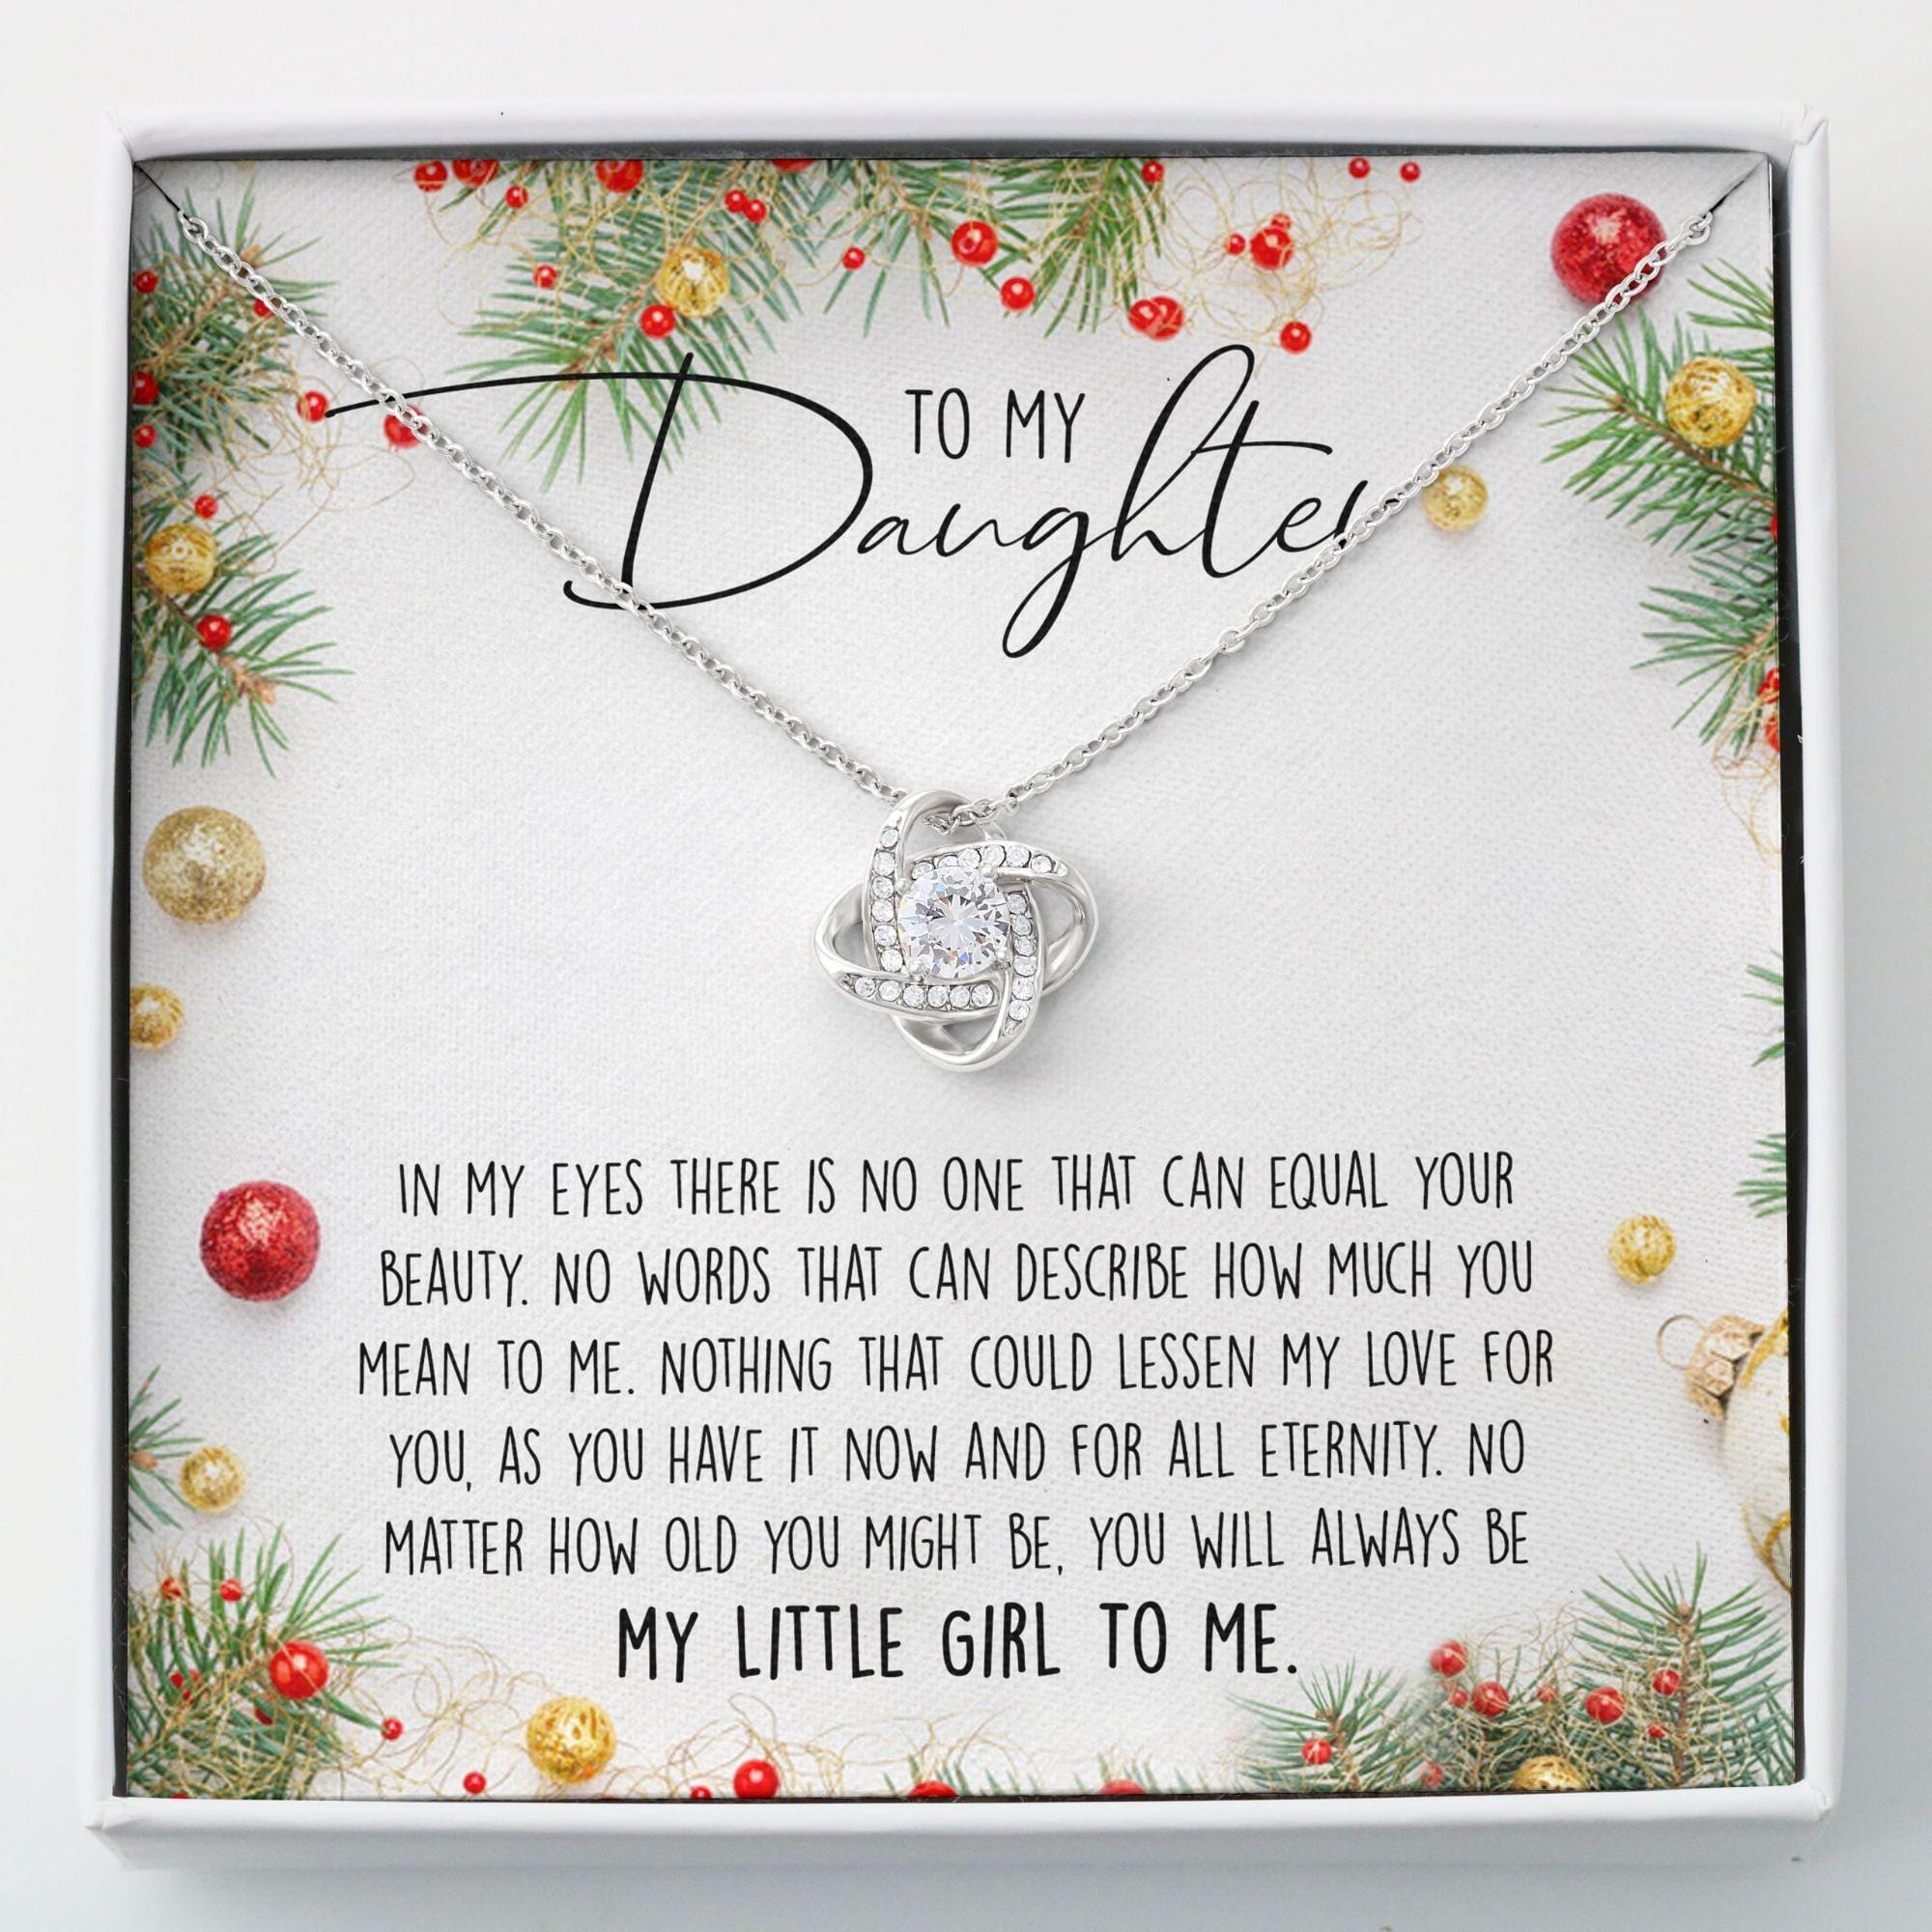 To My Daughter Love Knot Necklace Merry Christmas - You Always Be My Little Girl To Me